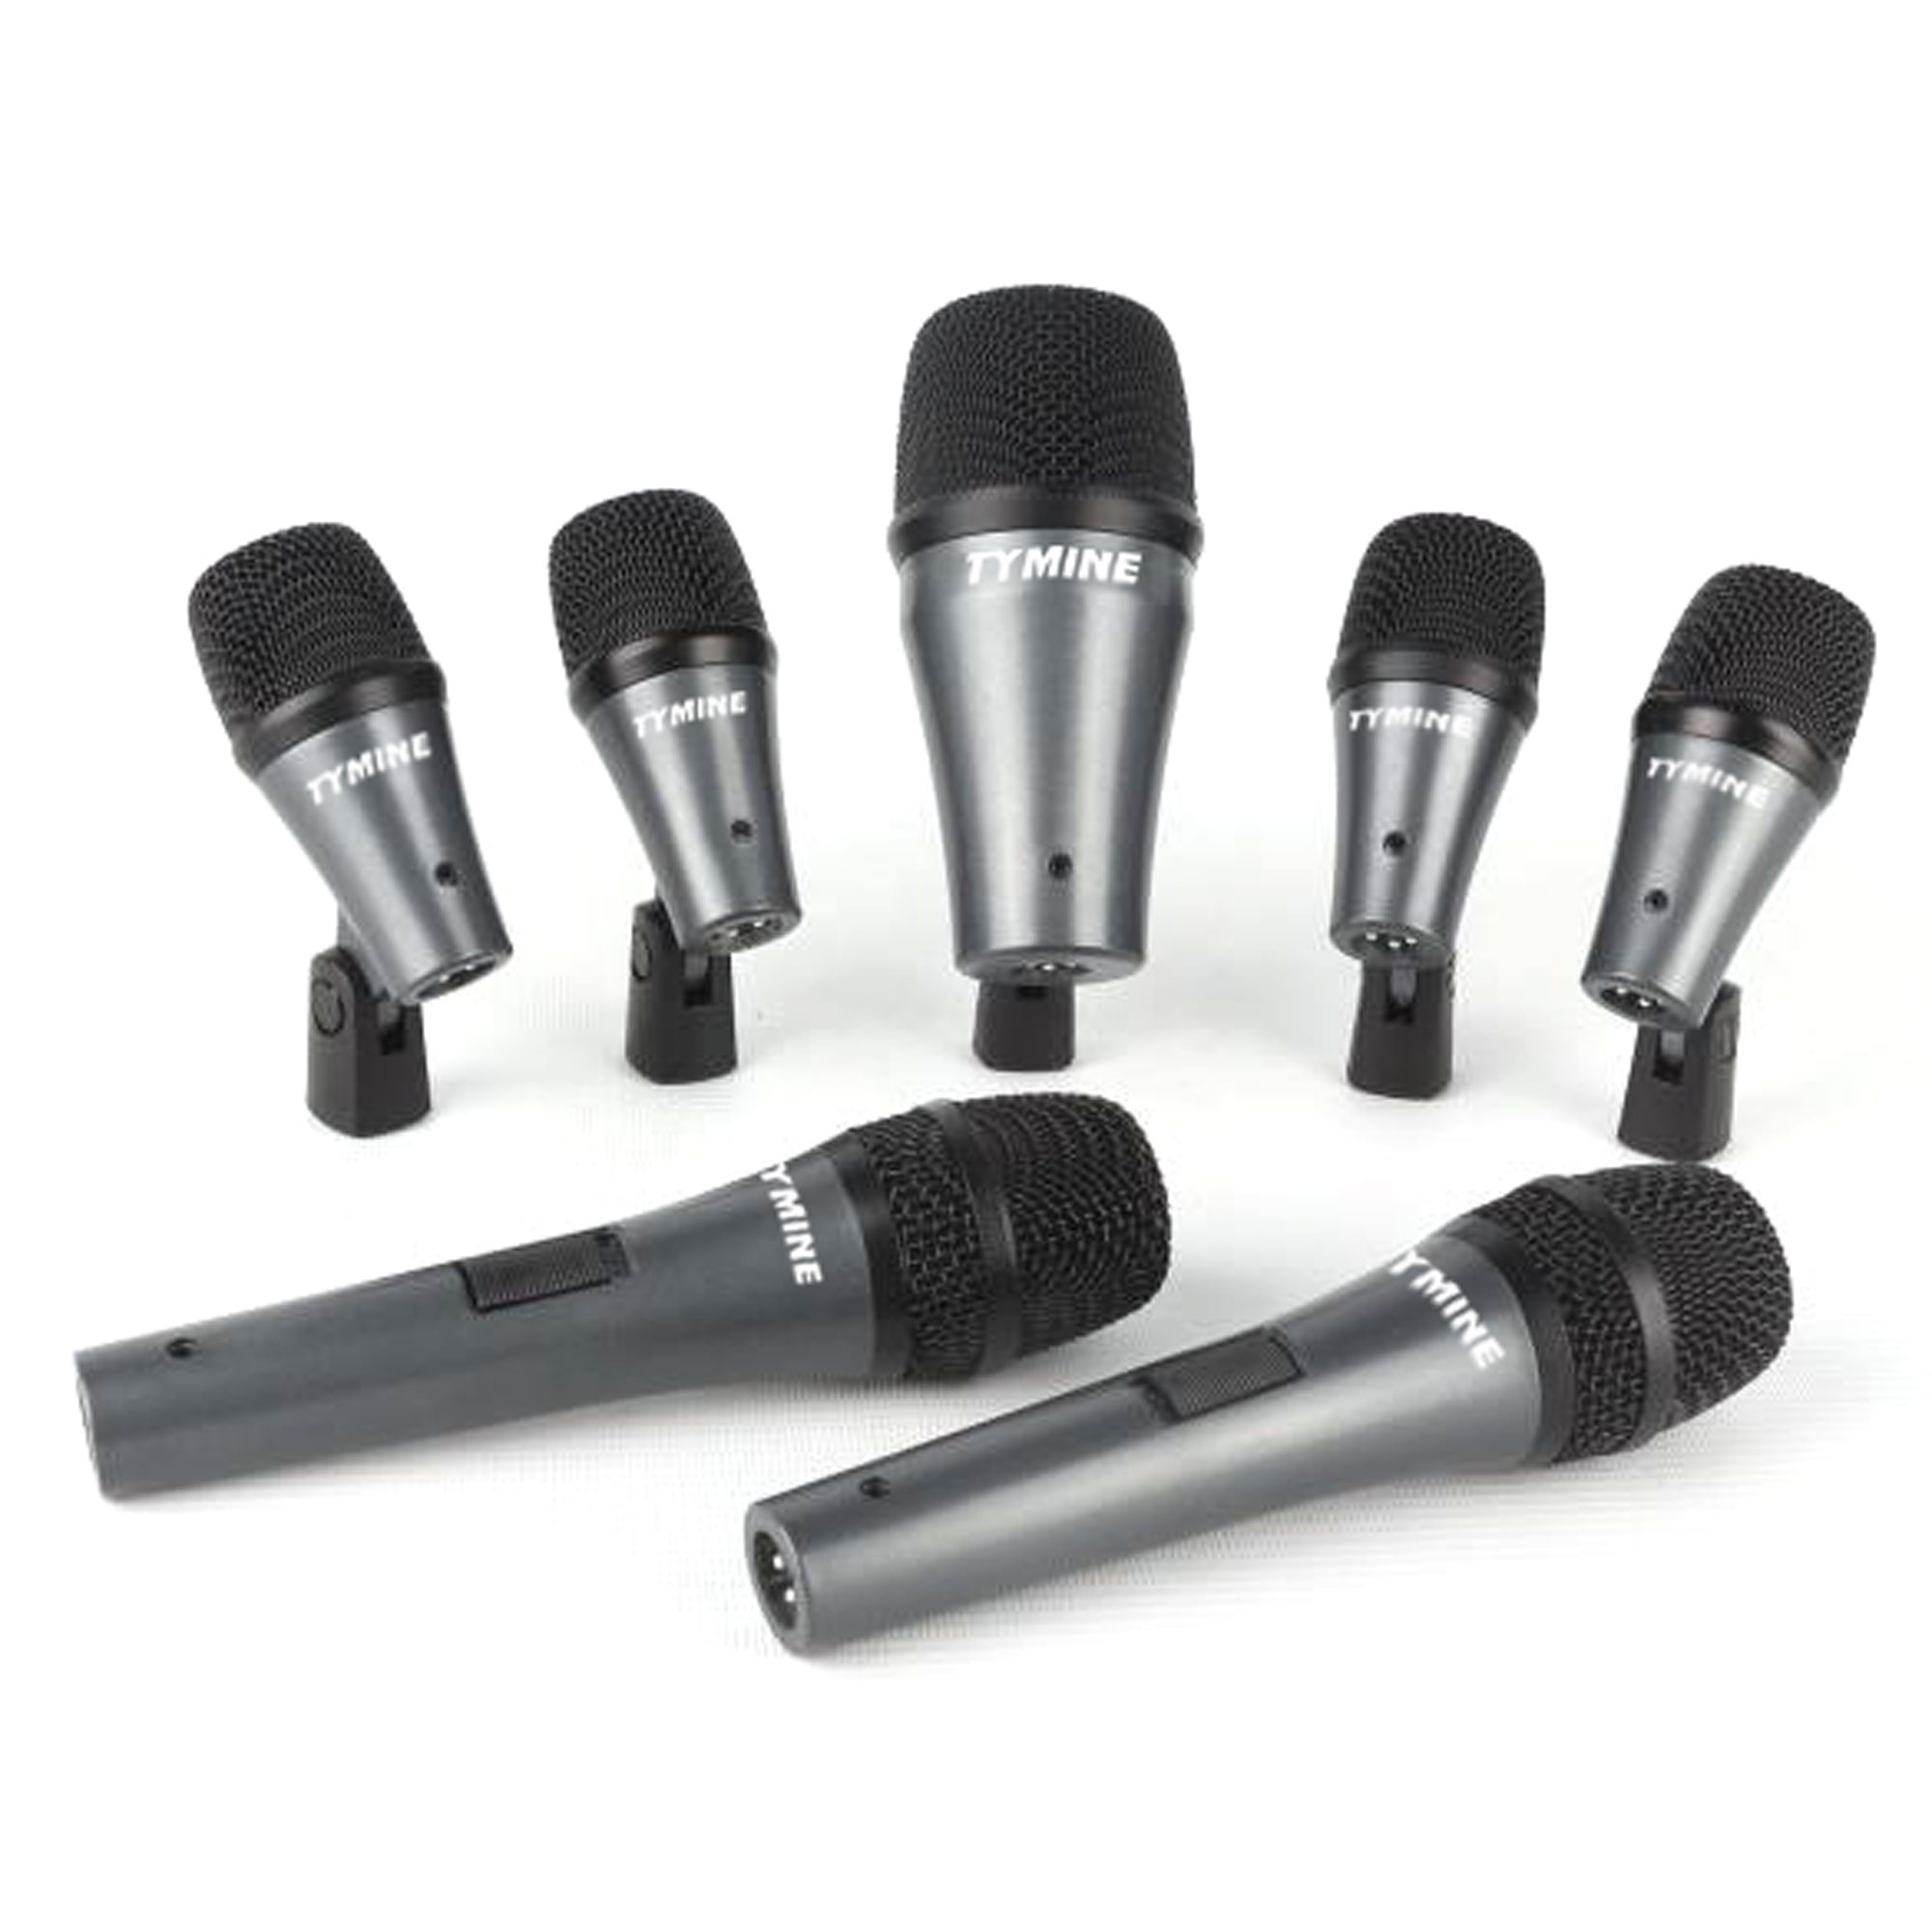 7 pcs drum microphone set drum microphone kit with microphone clamp 